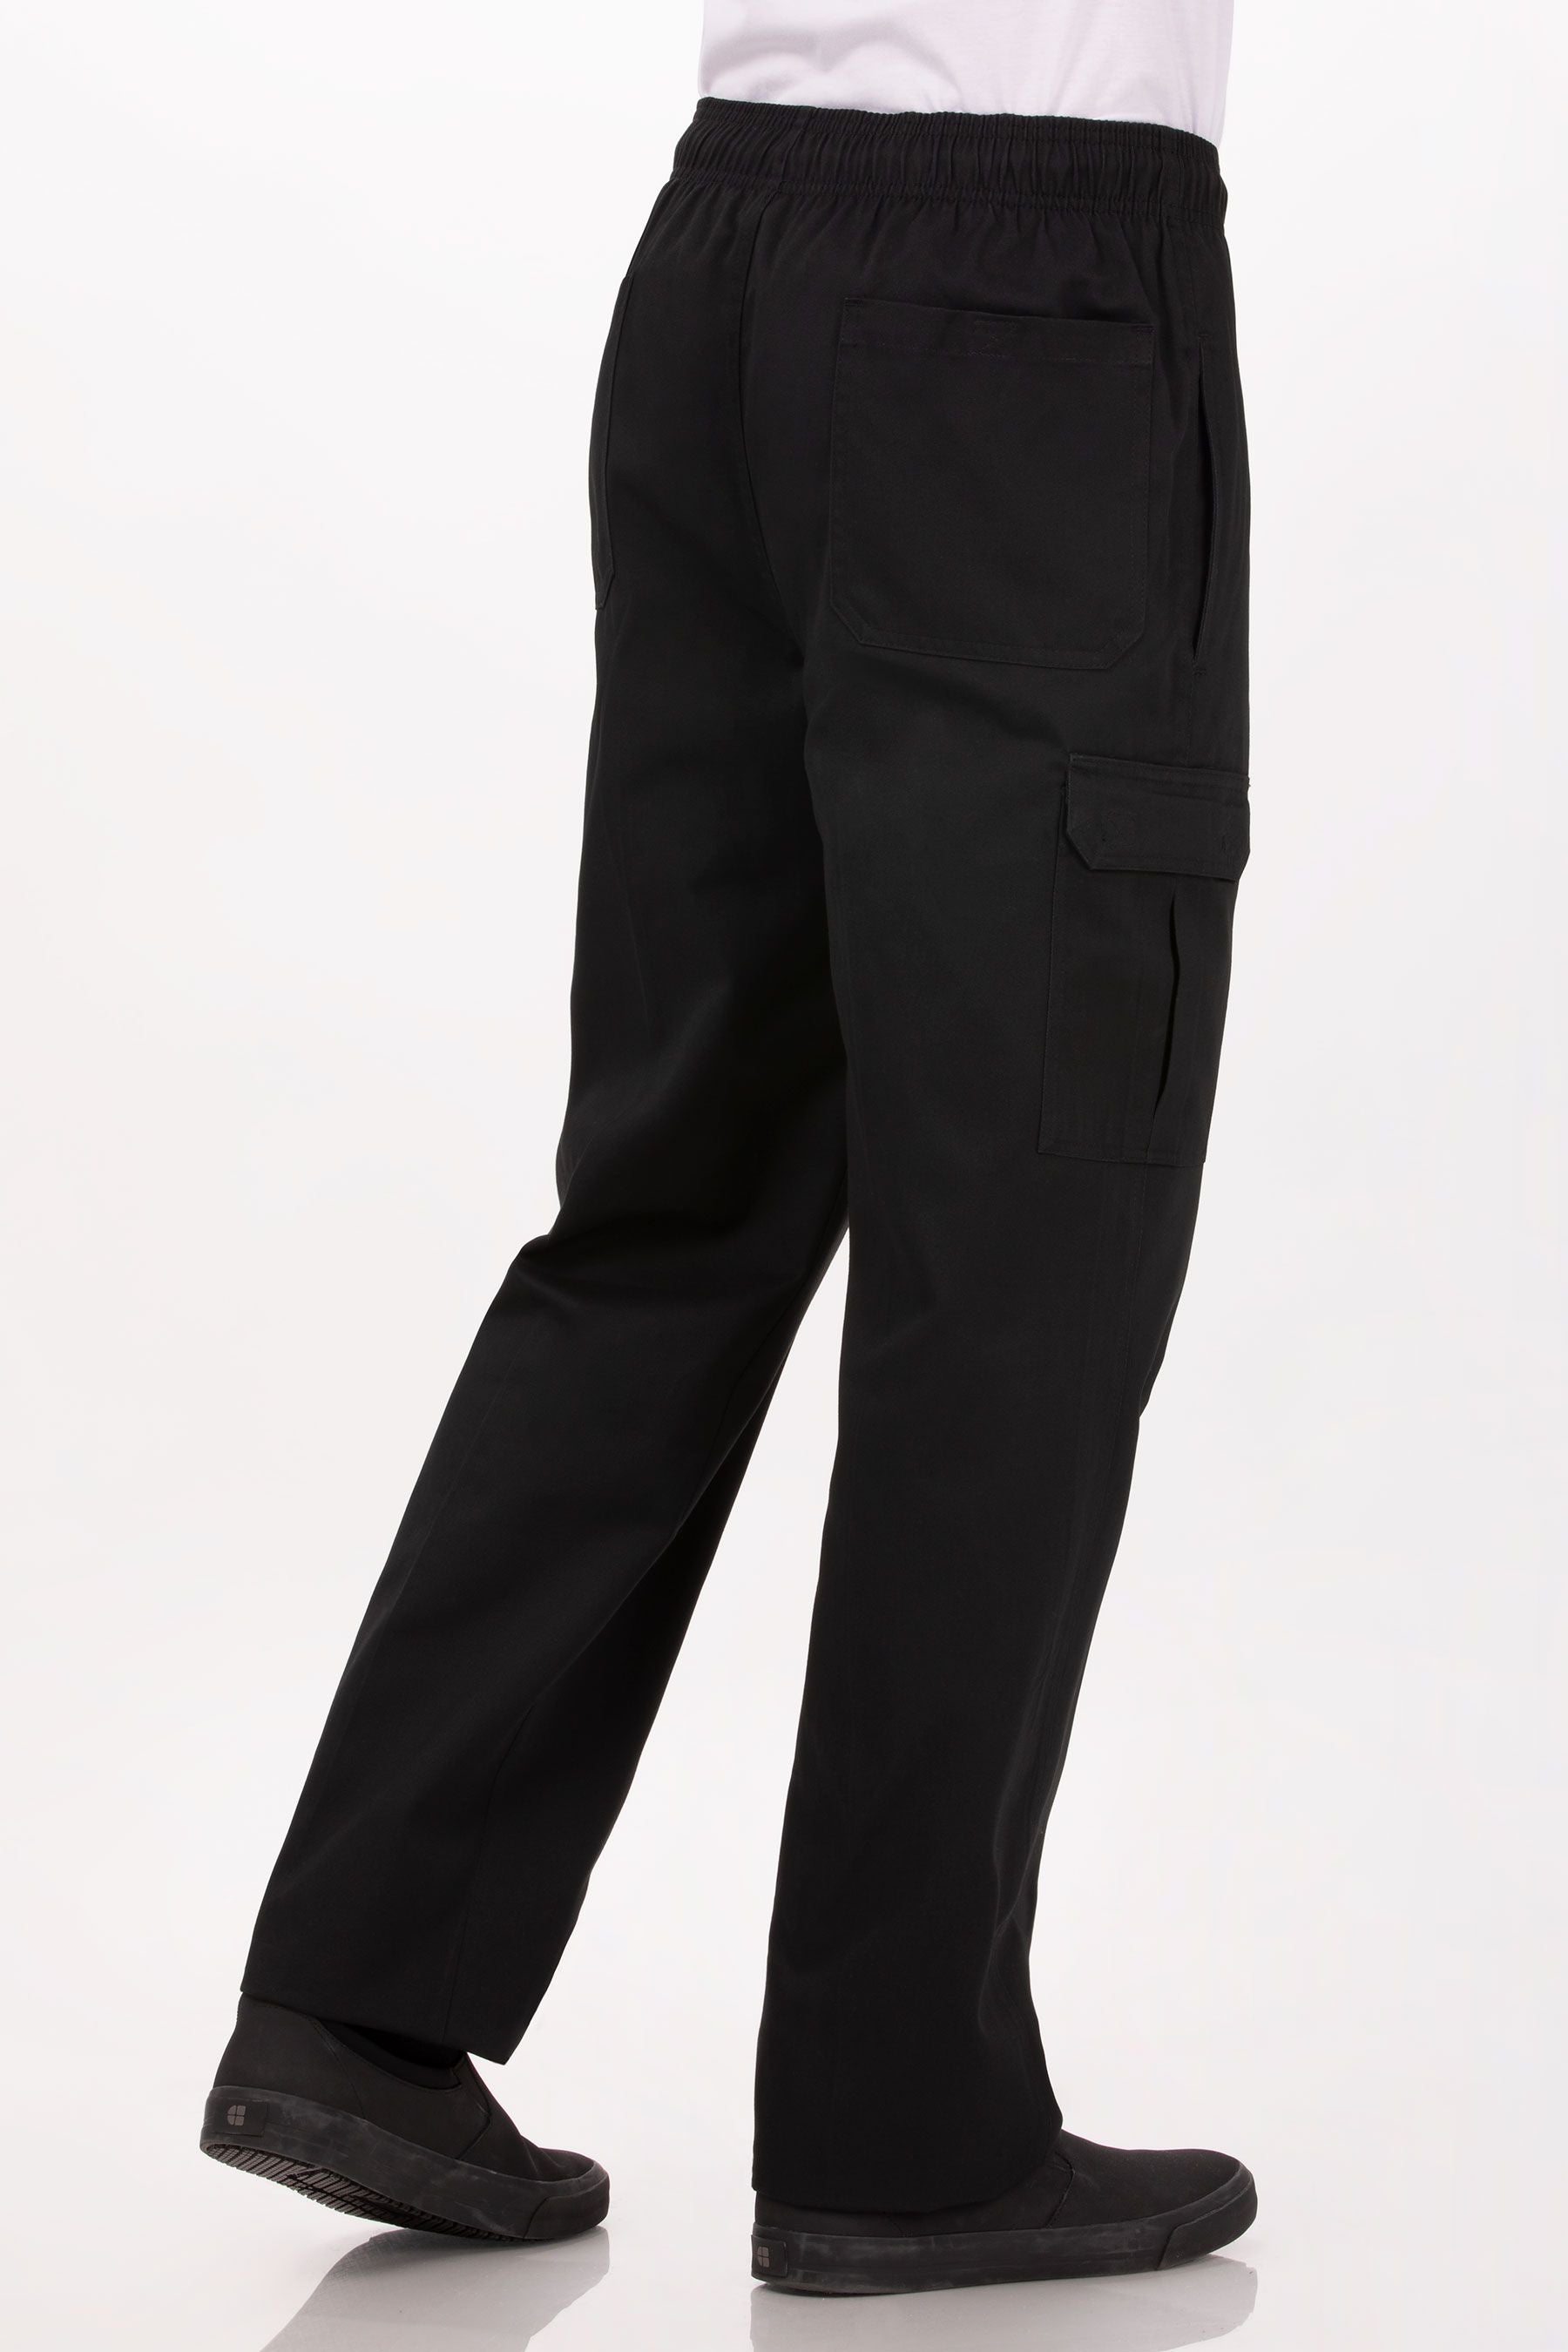 chef-works-cargo-chef-pants-black